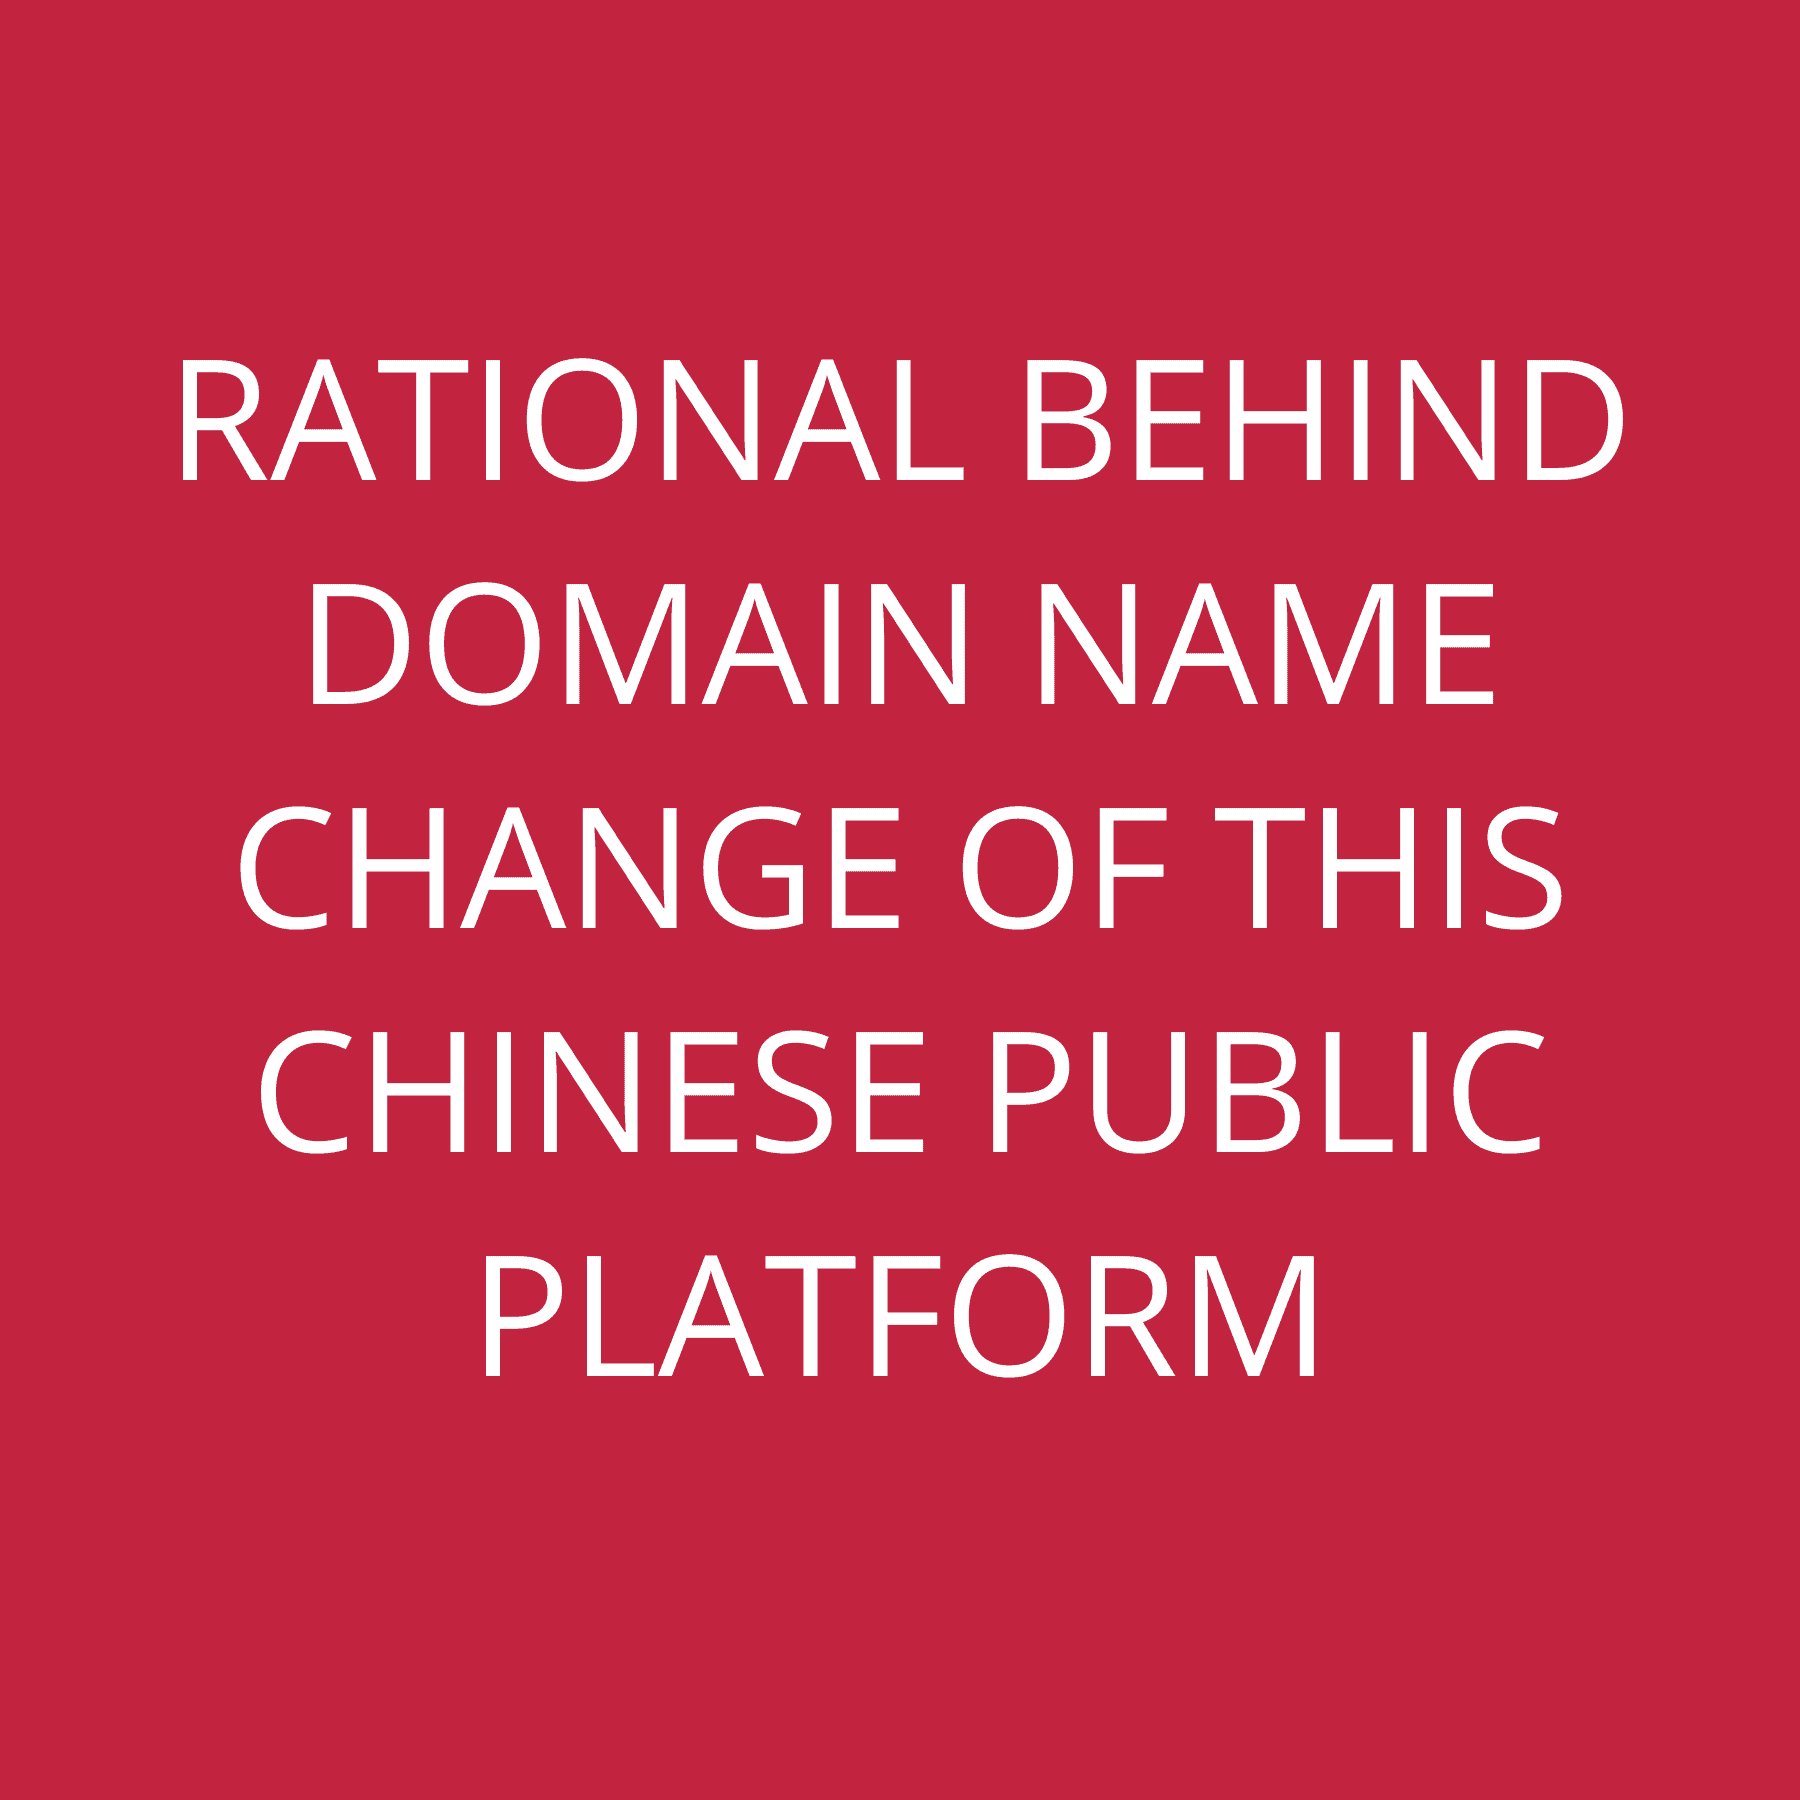 Rational behind domain name change of this Chinese public platform